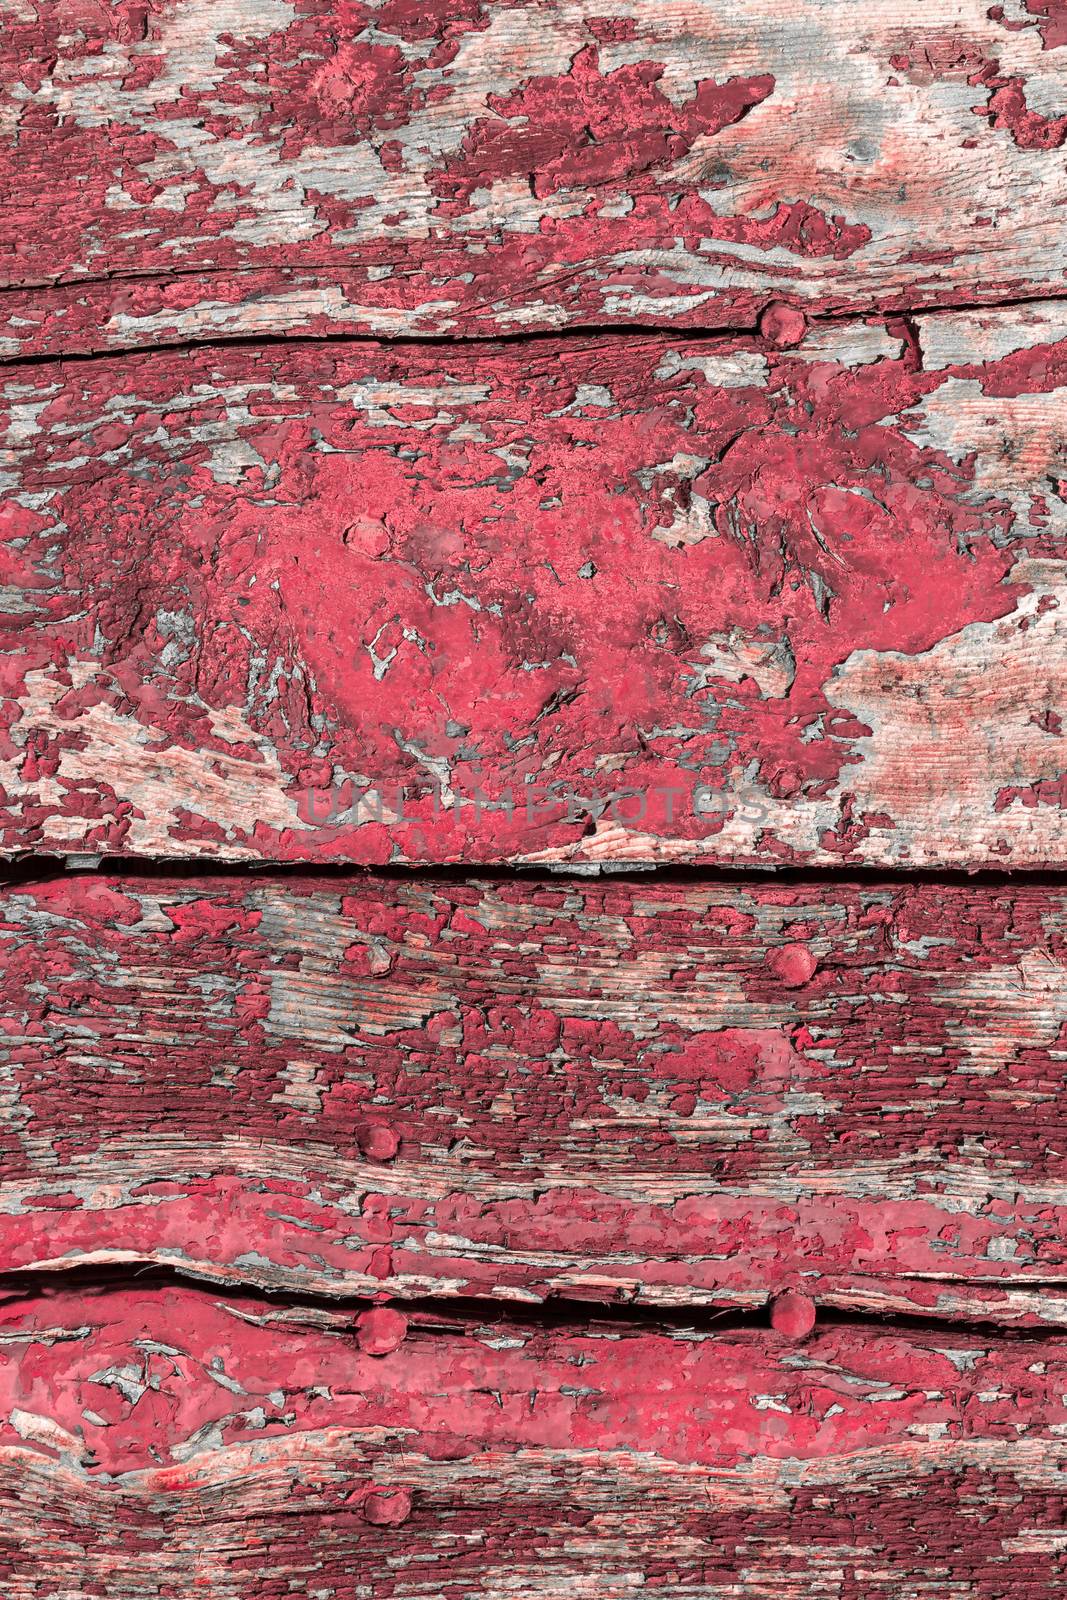 Fuchsia background. Old paint cracked on a wooden planks.